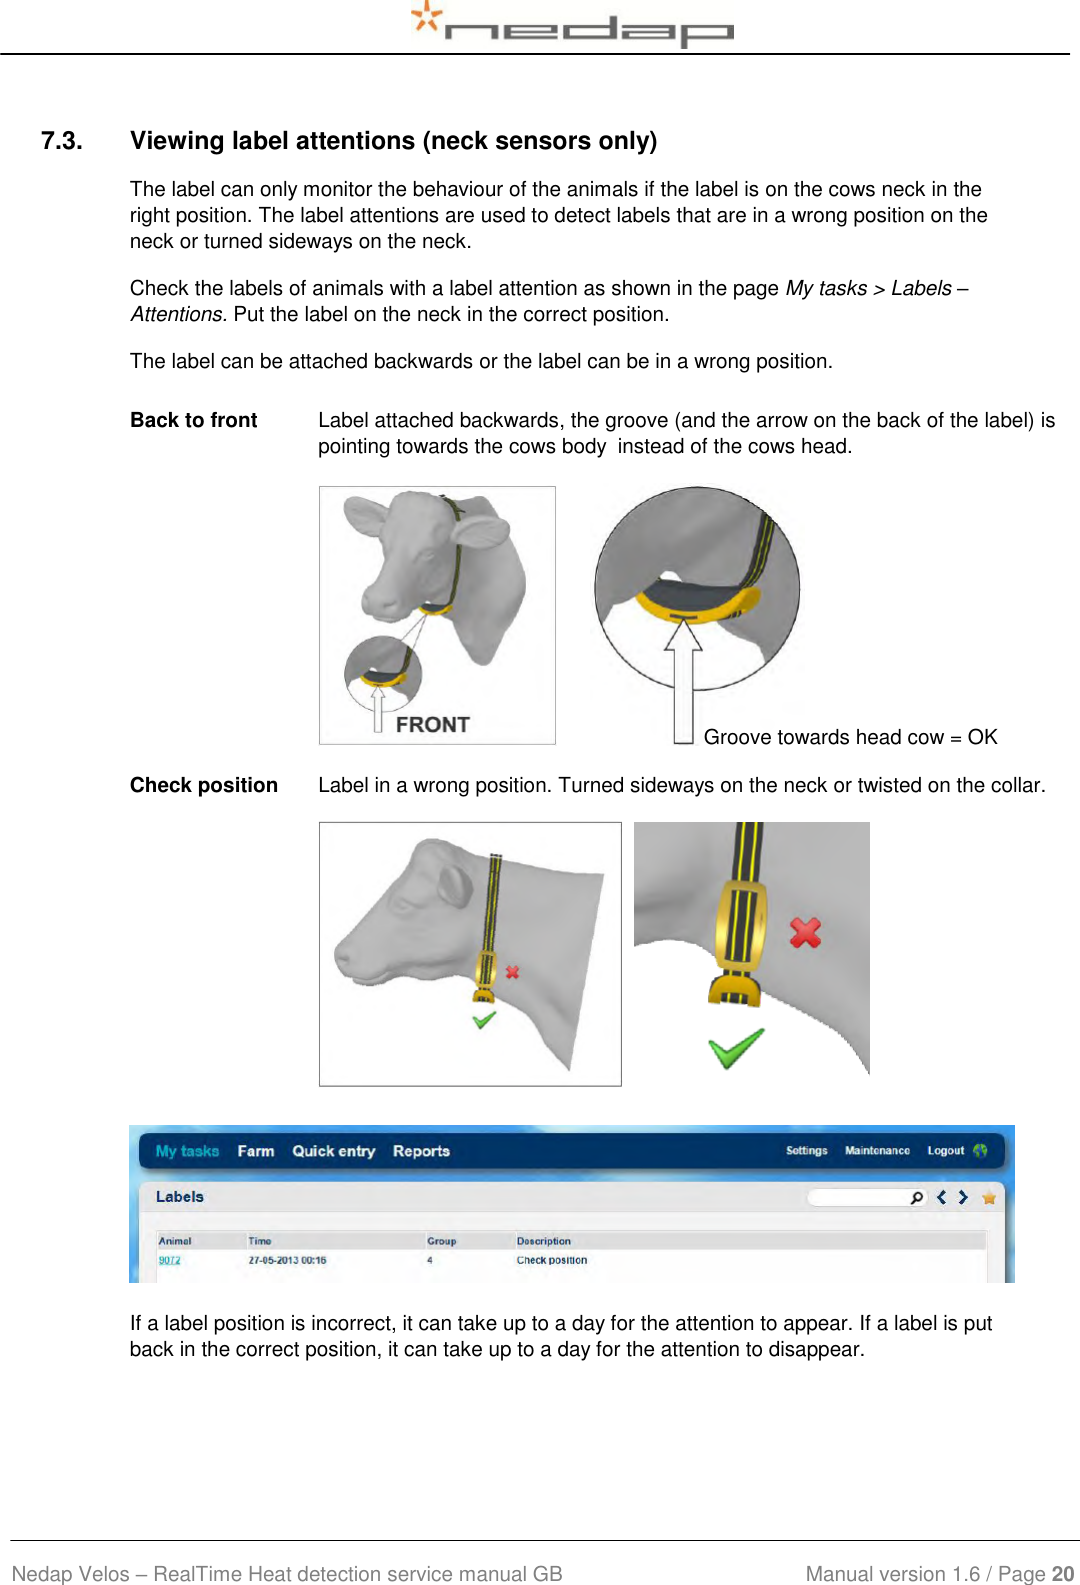  Nedap Velos – RealTime Heat detection service manual GB                            Manual version 1.6 / Page 20  7.3.  Viewing label attentions (neck sensors only) The label can only monitor the behaviour of the animals if the label is on the cows neck in the right position. The label attentions are used to detect labels that are in a wrong position on the neck or turned sideways on the neck. Check the labels of animals with a label attention as shown in the page My tasks &gt; Labels – Attentions. Put the label on the neck in the correct position. The label can be attached backwards or the label can be in a wrong position.    Back to front Label attached backwards, the groove (and the arrow on the back of the label) is pointing towards the cows body  instead of the cows head.          Check position Label in a wrong position. Turned sideways on the neck or twisted on the collar.           If a label position is incorrect, it can take up to a day for the attention to appear. If a label is put back in the correct position, it can take up to a day for the attention to disappear. Groove towards head cow = OK 